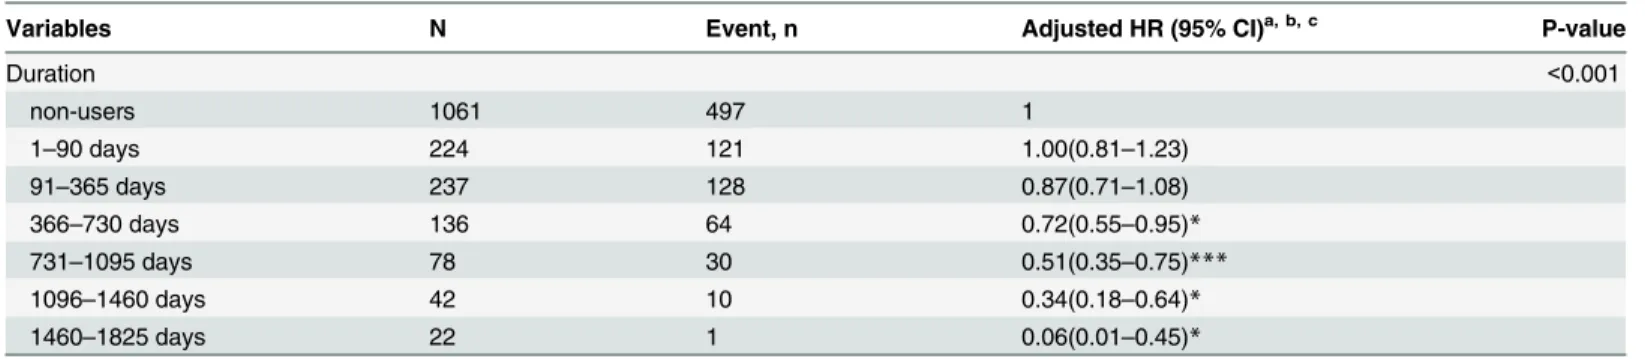 Table 3. Risk of MACE for patients with different cumulative prescription days of ARB.